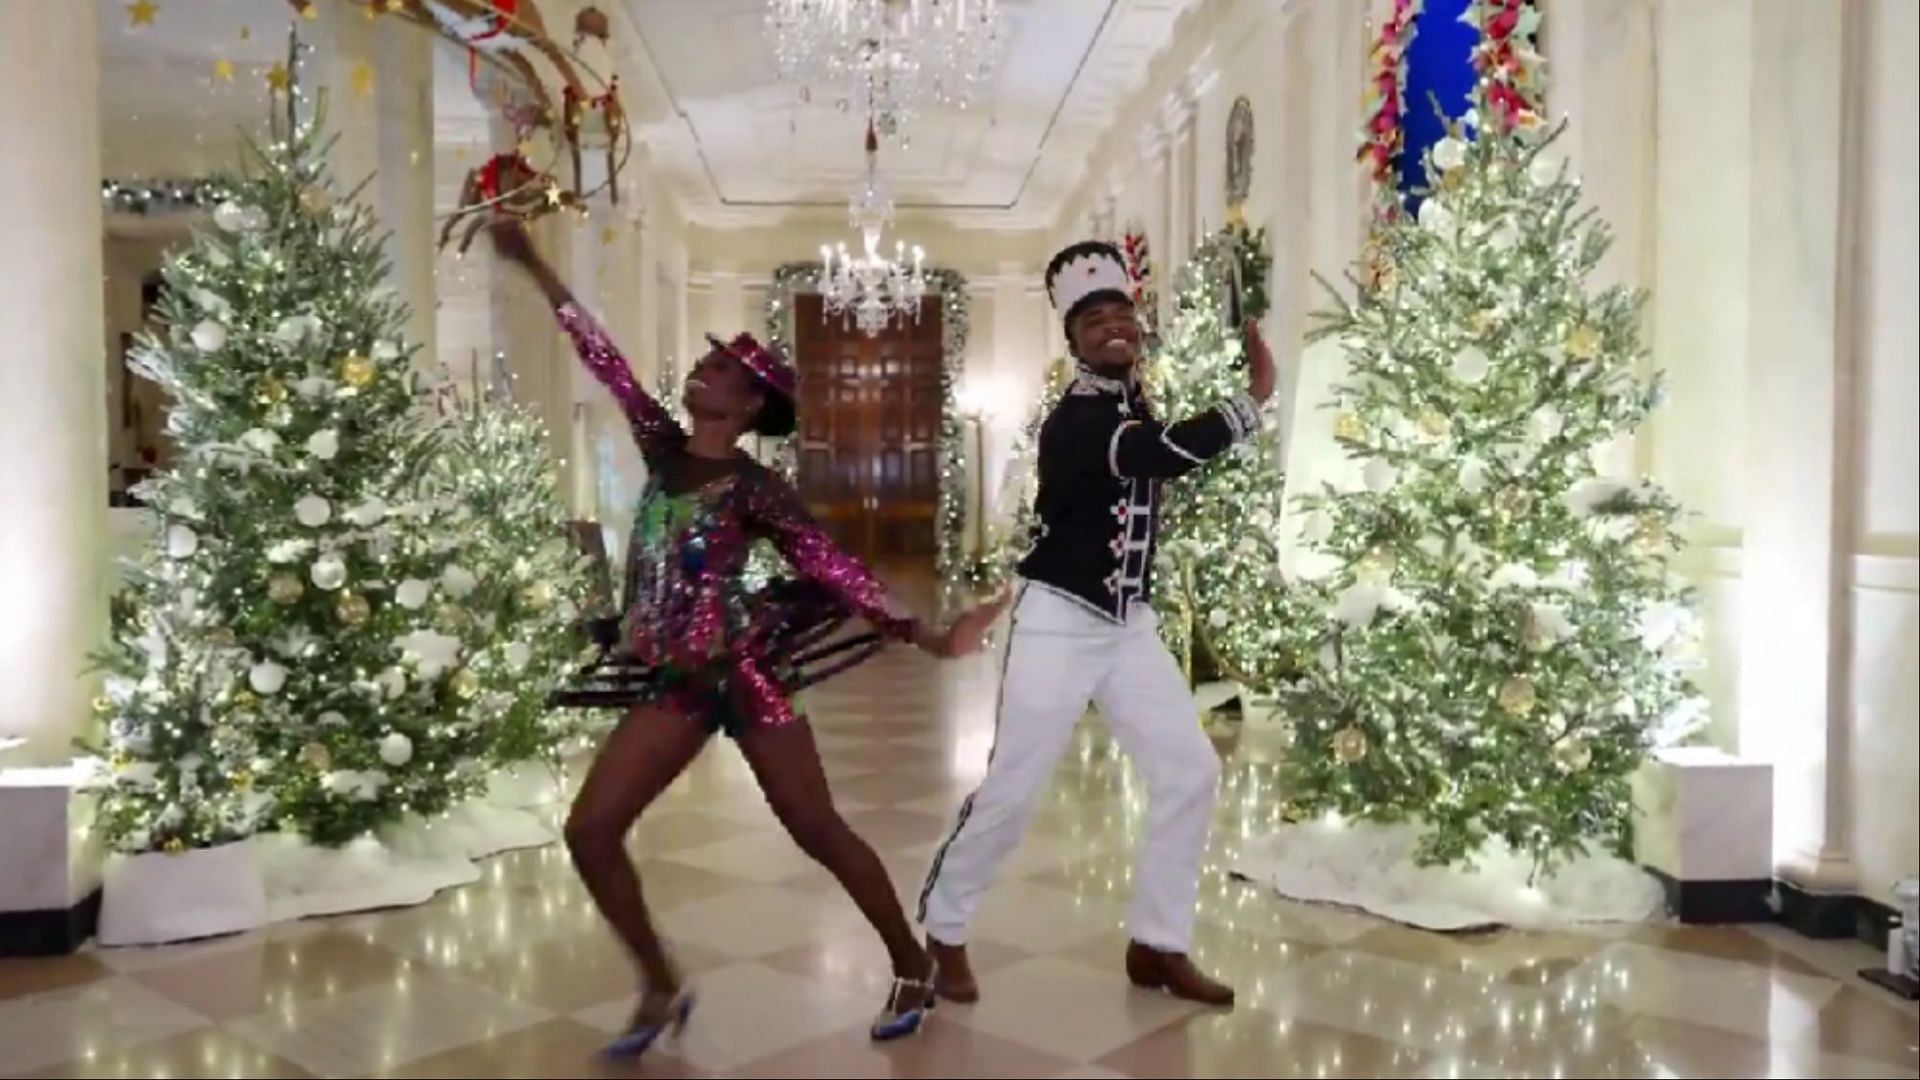 Dorrance Dance troupe performing at the White House as part of Christmas 2023 celebrations. (Image via X/FLOTUS)